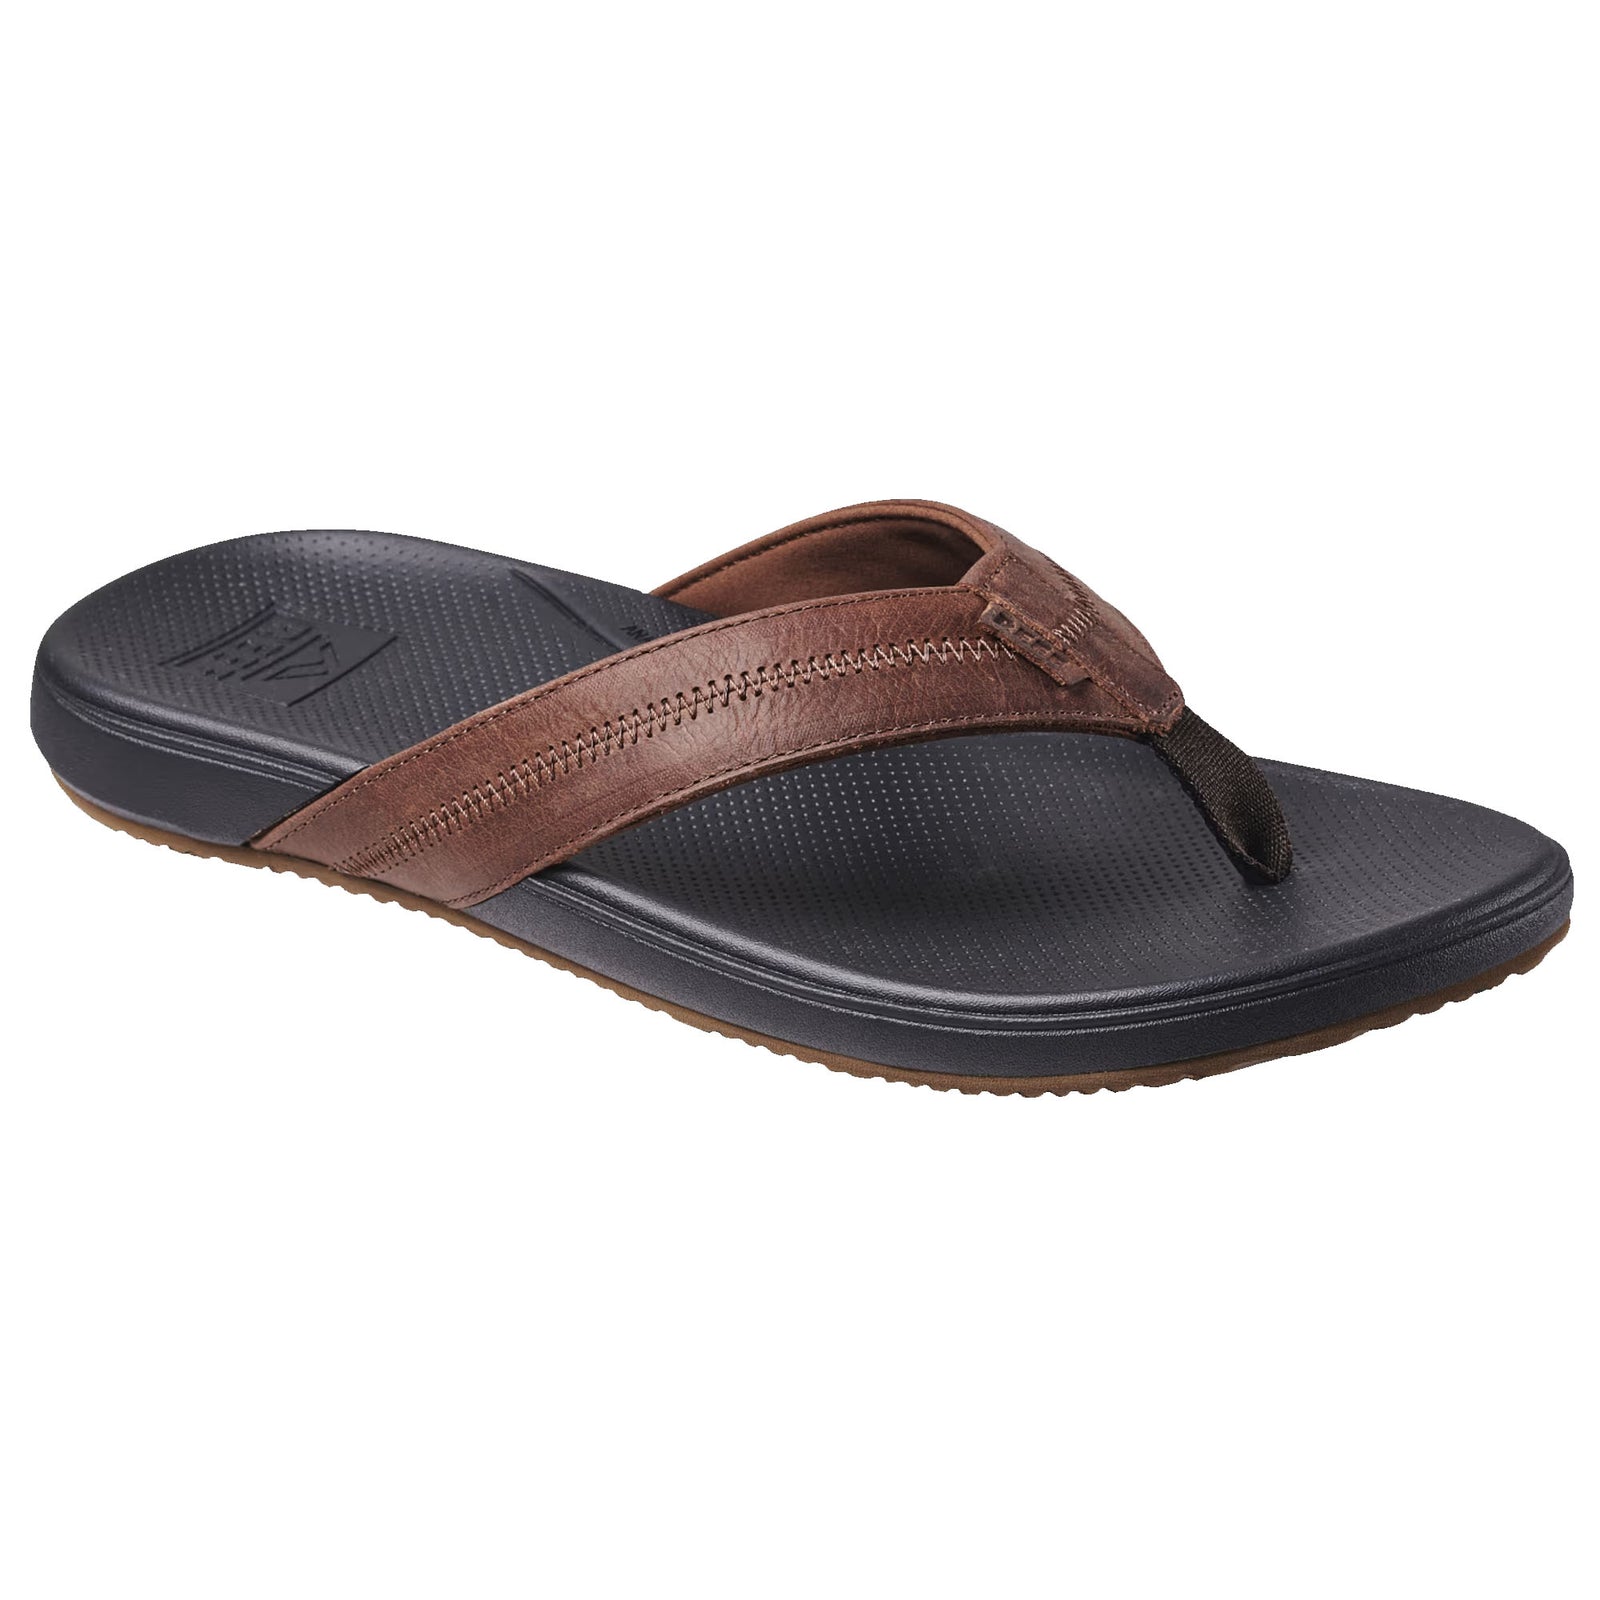 Reef Sandals - Surf Station Store